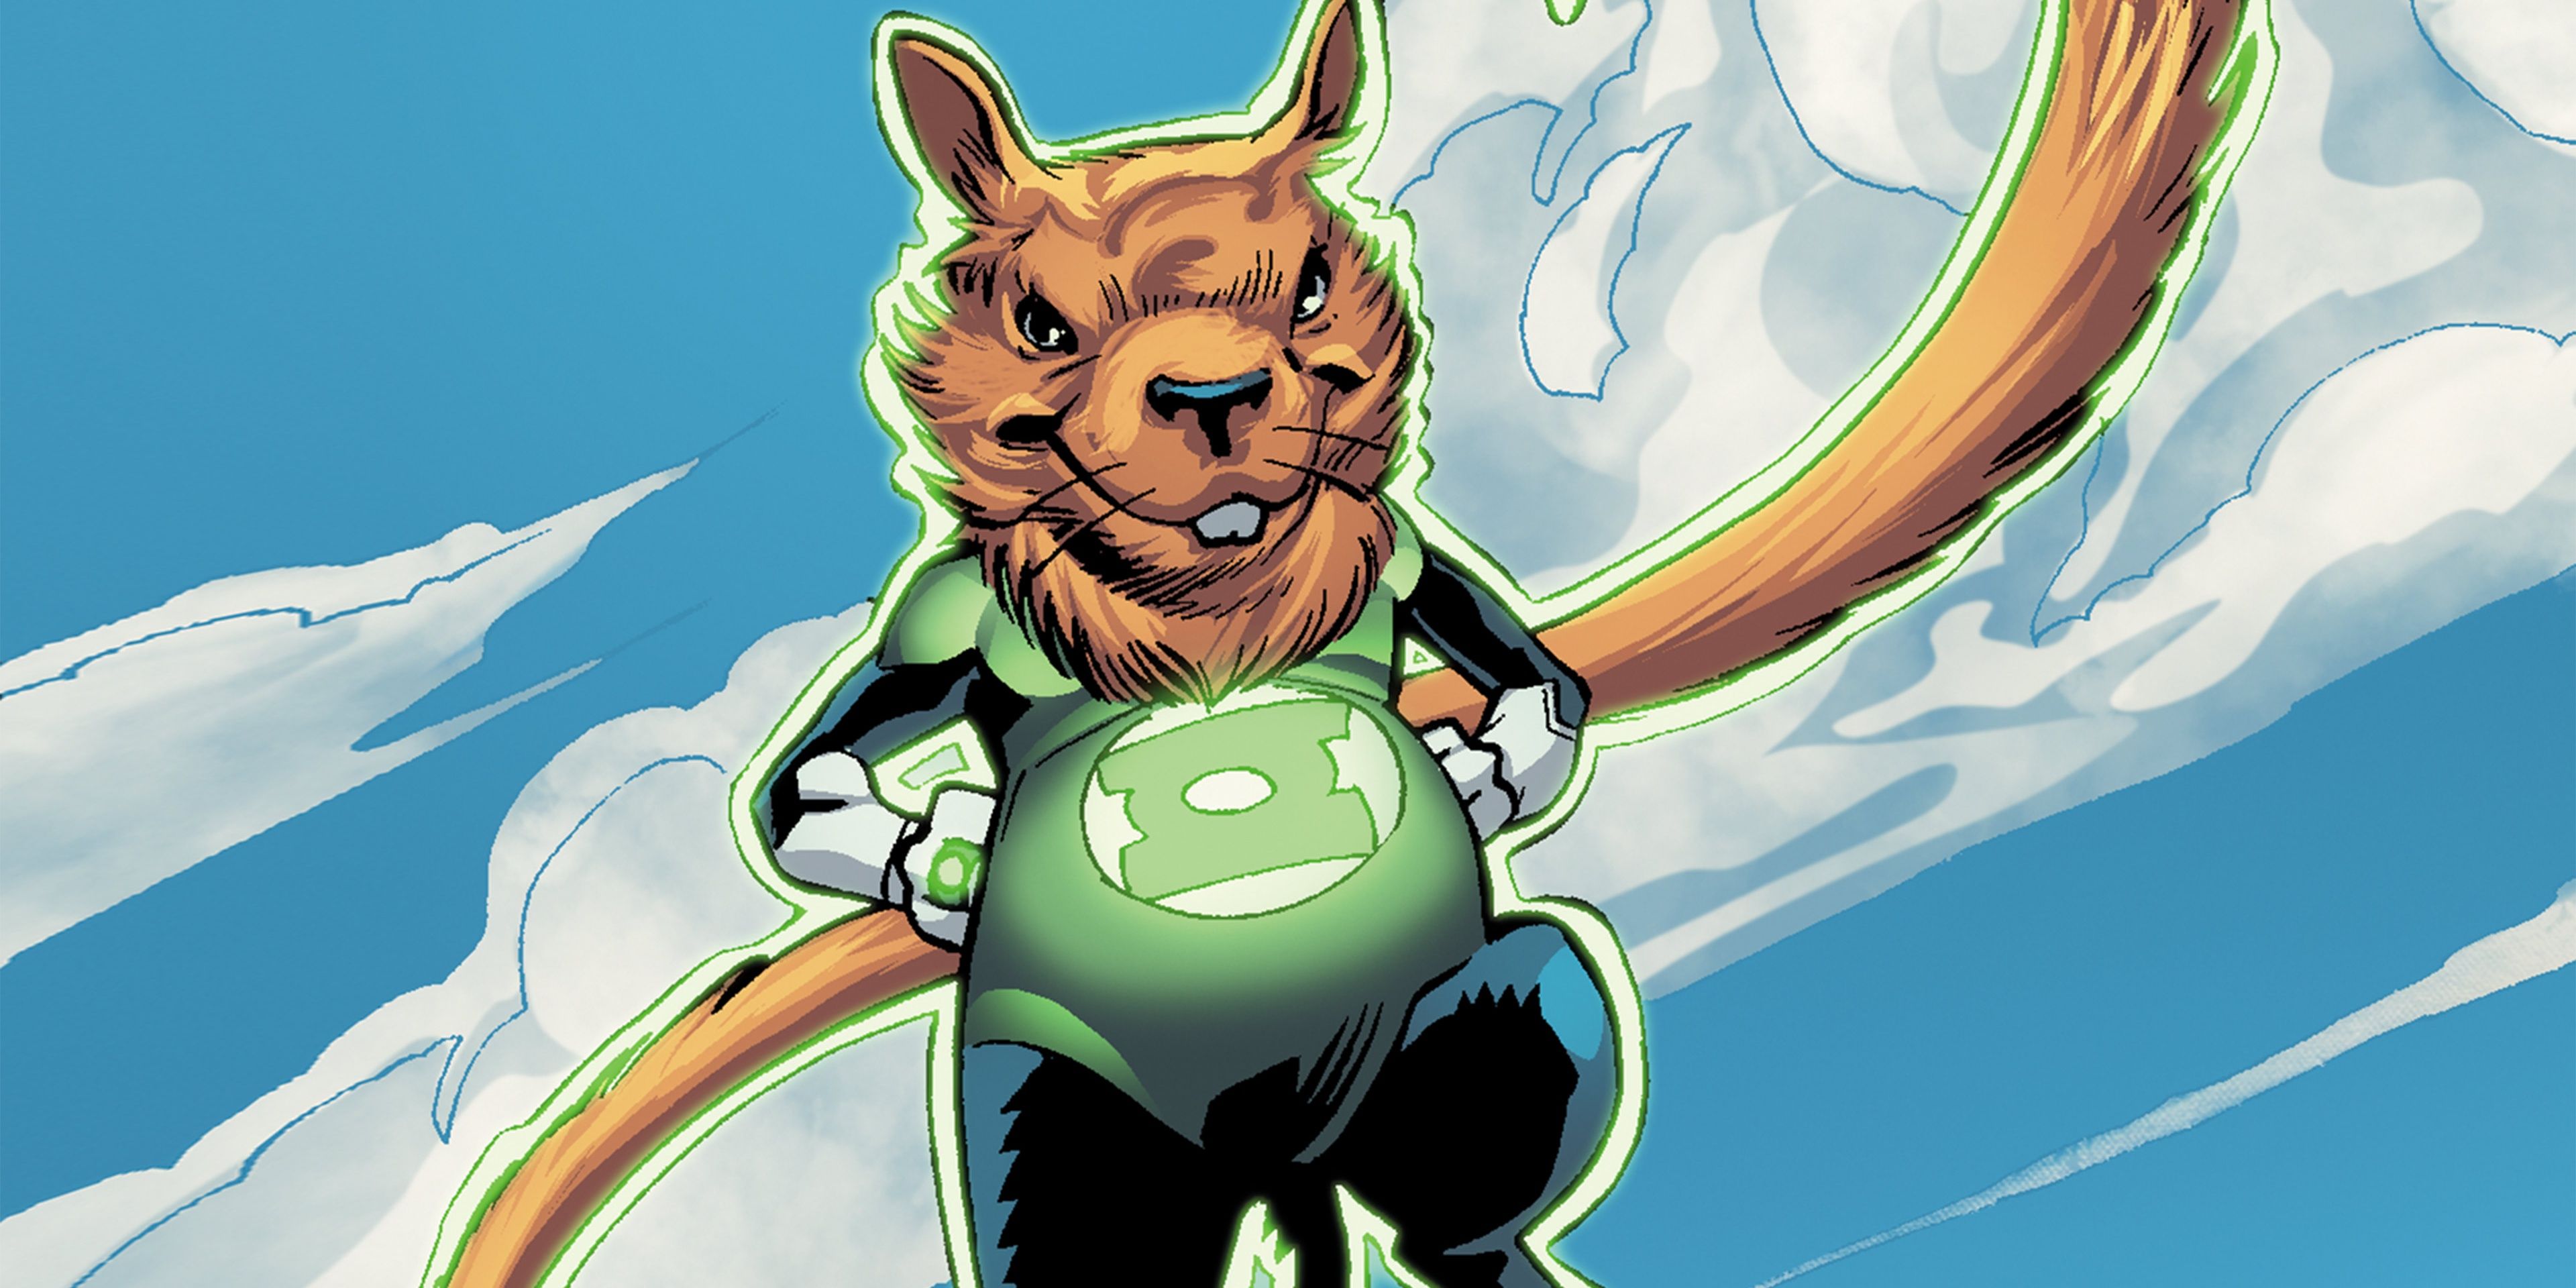 Ch'p in his Green Lantern outfit.